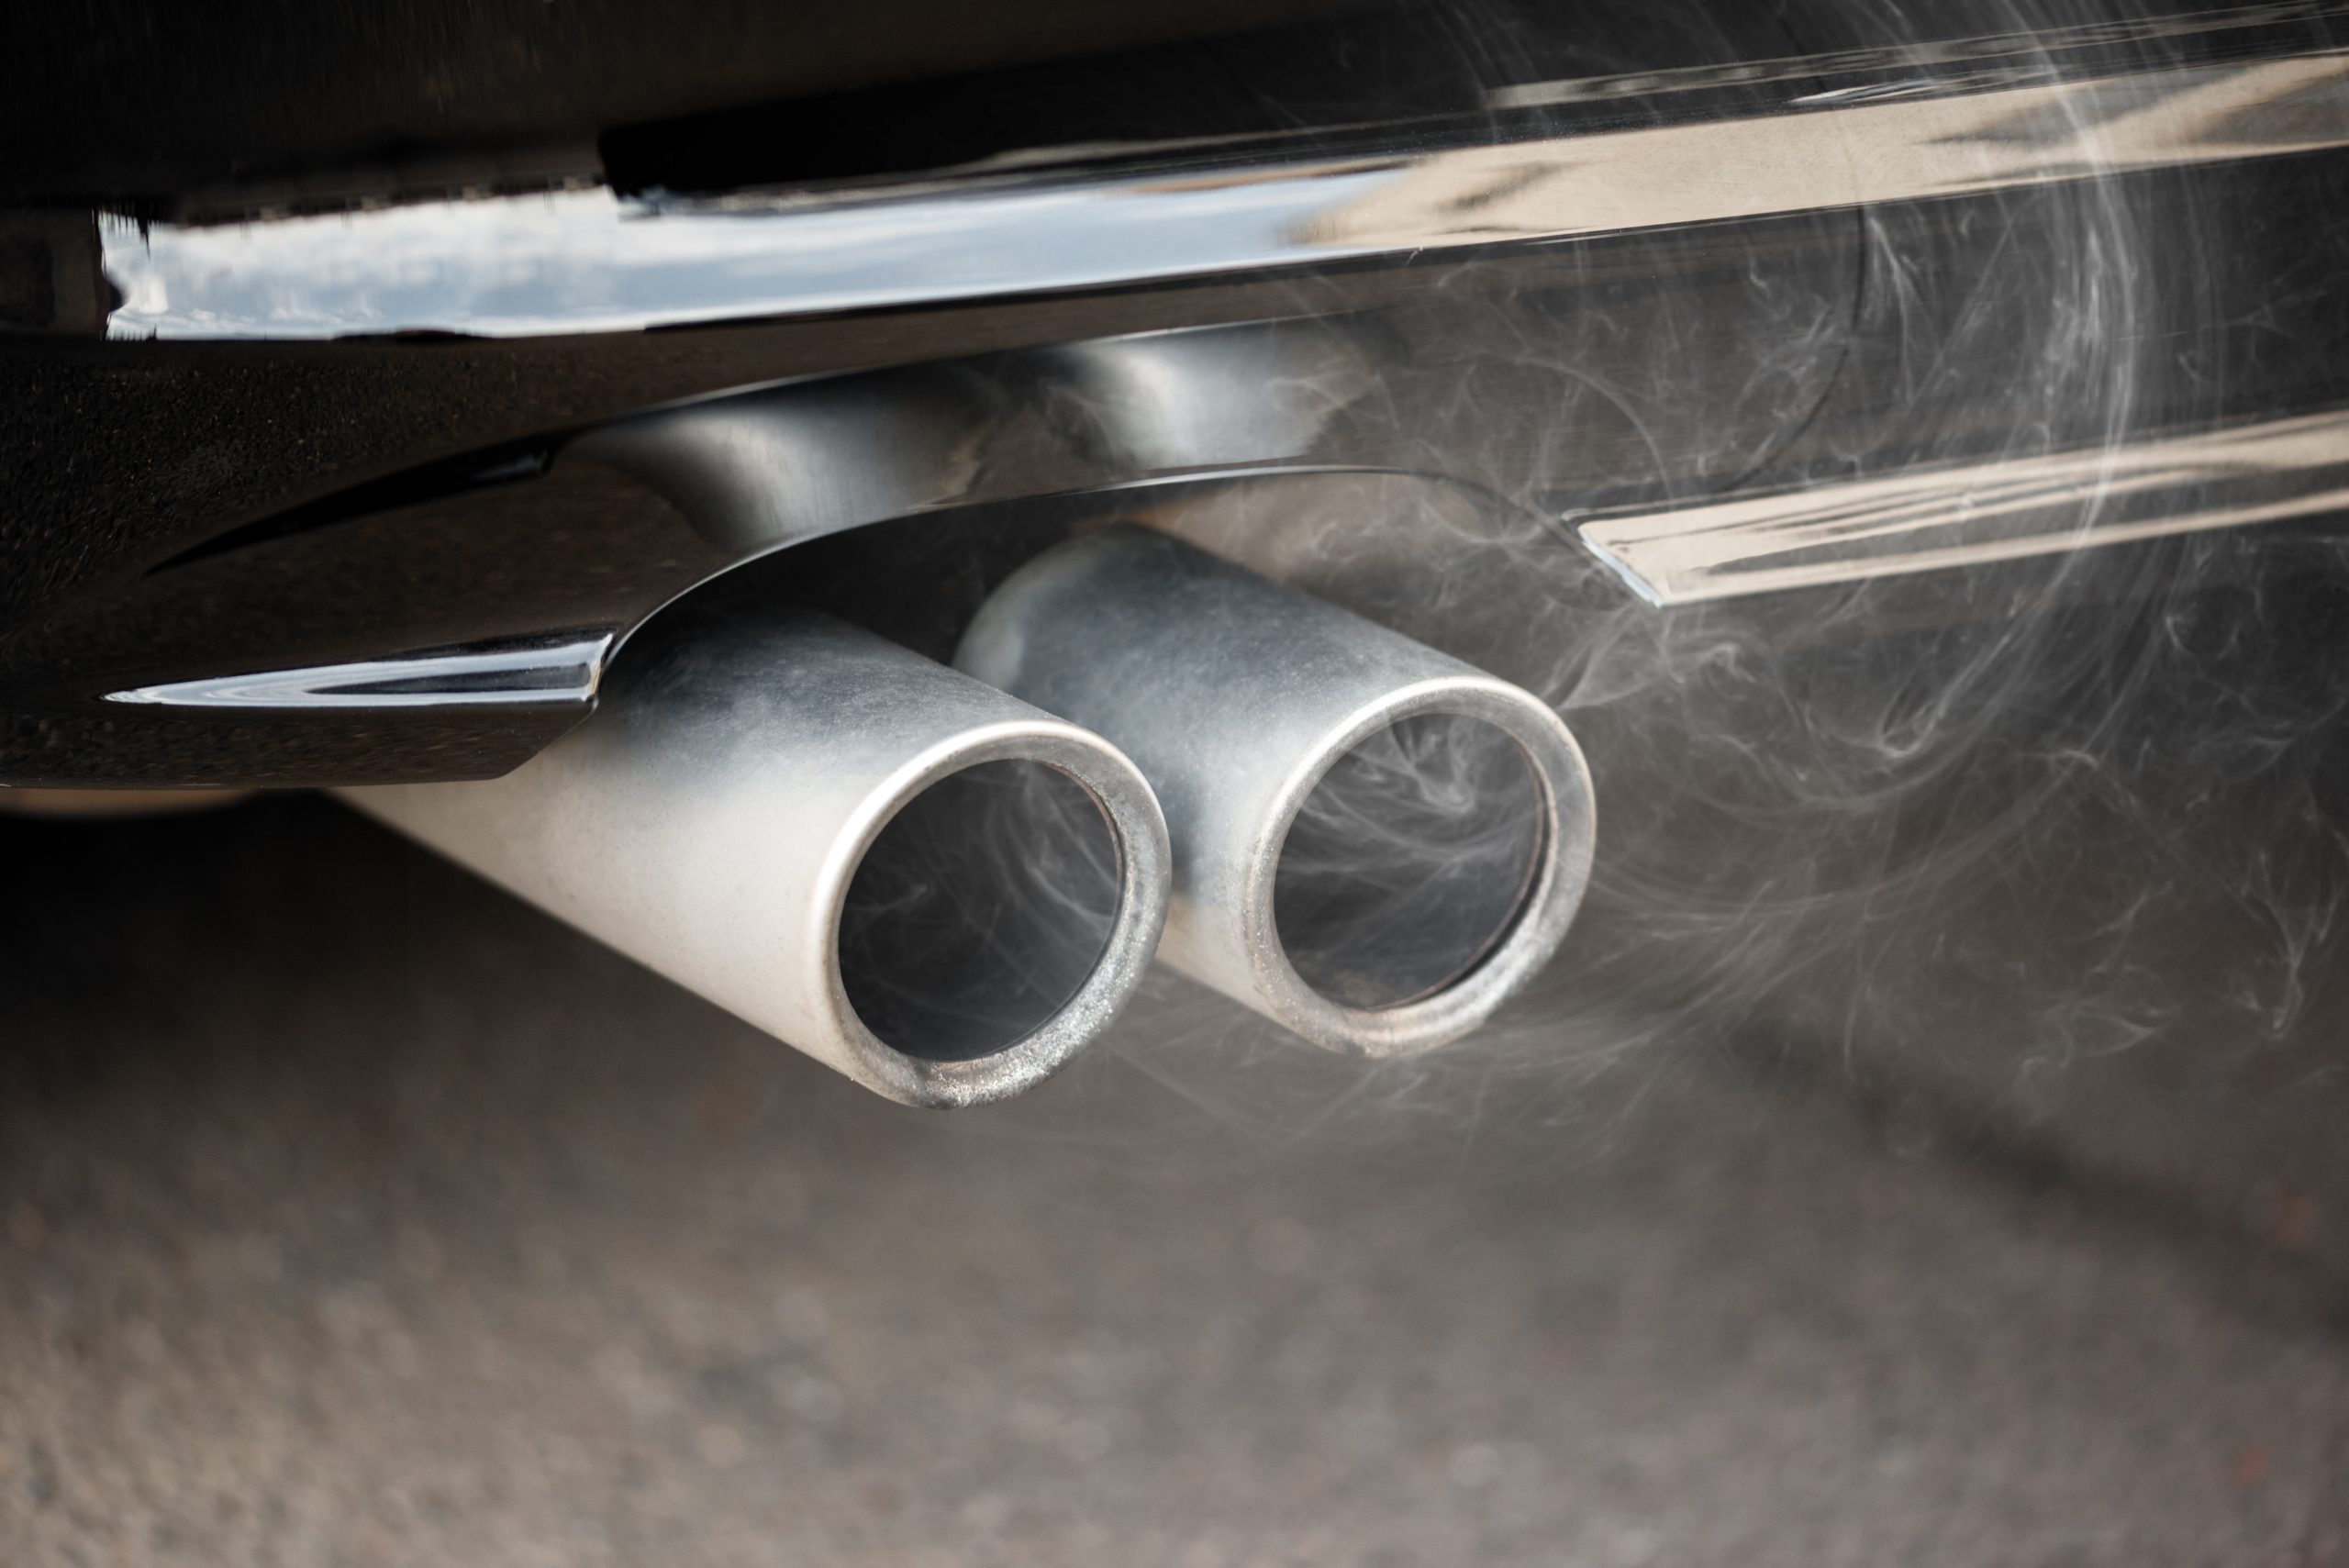 Cheating of vehicle emissions